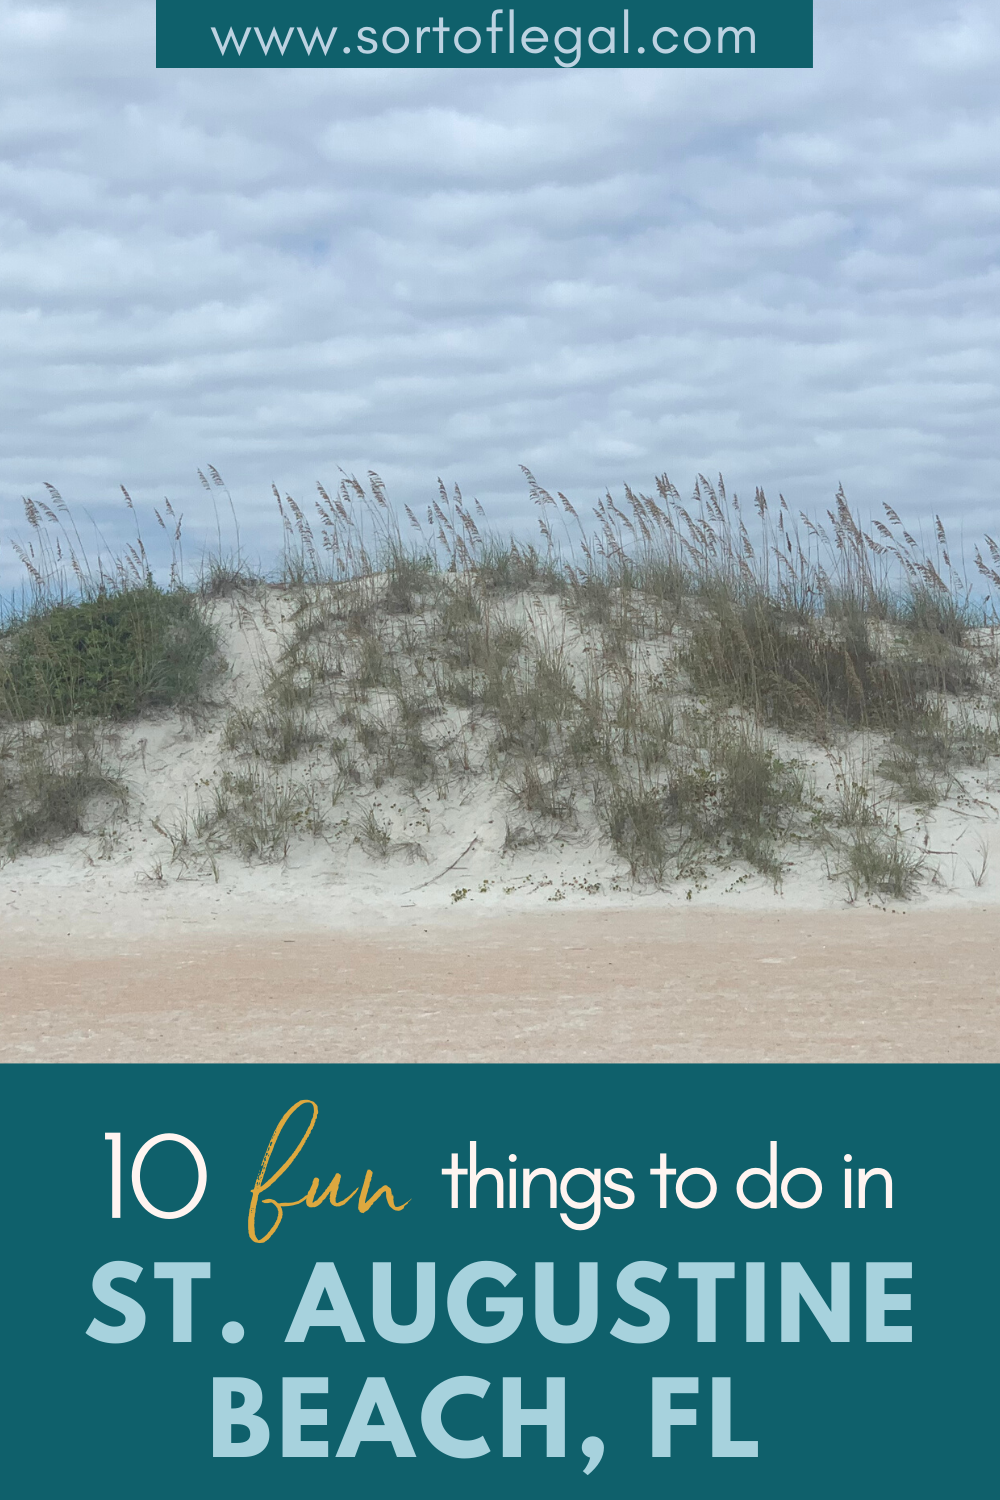 10 Things to do in St Augustine Beach Florida with Beach Dunes Image